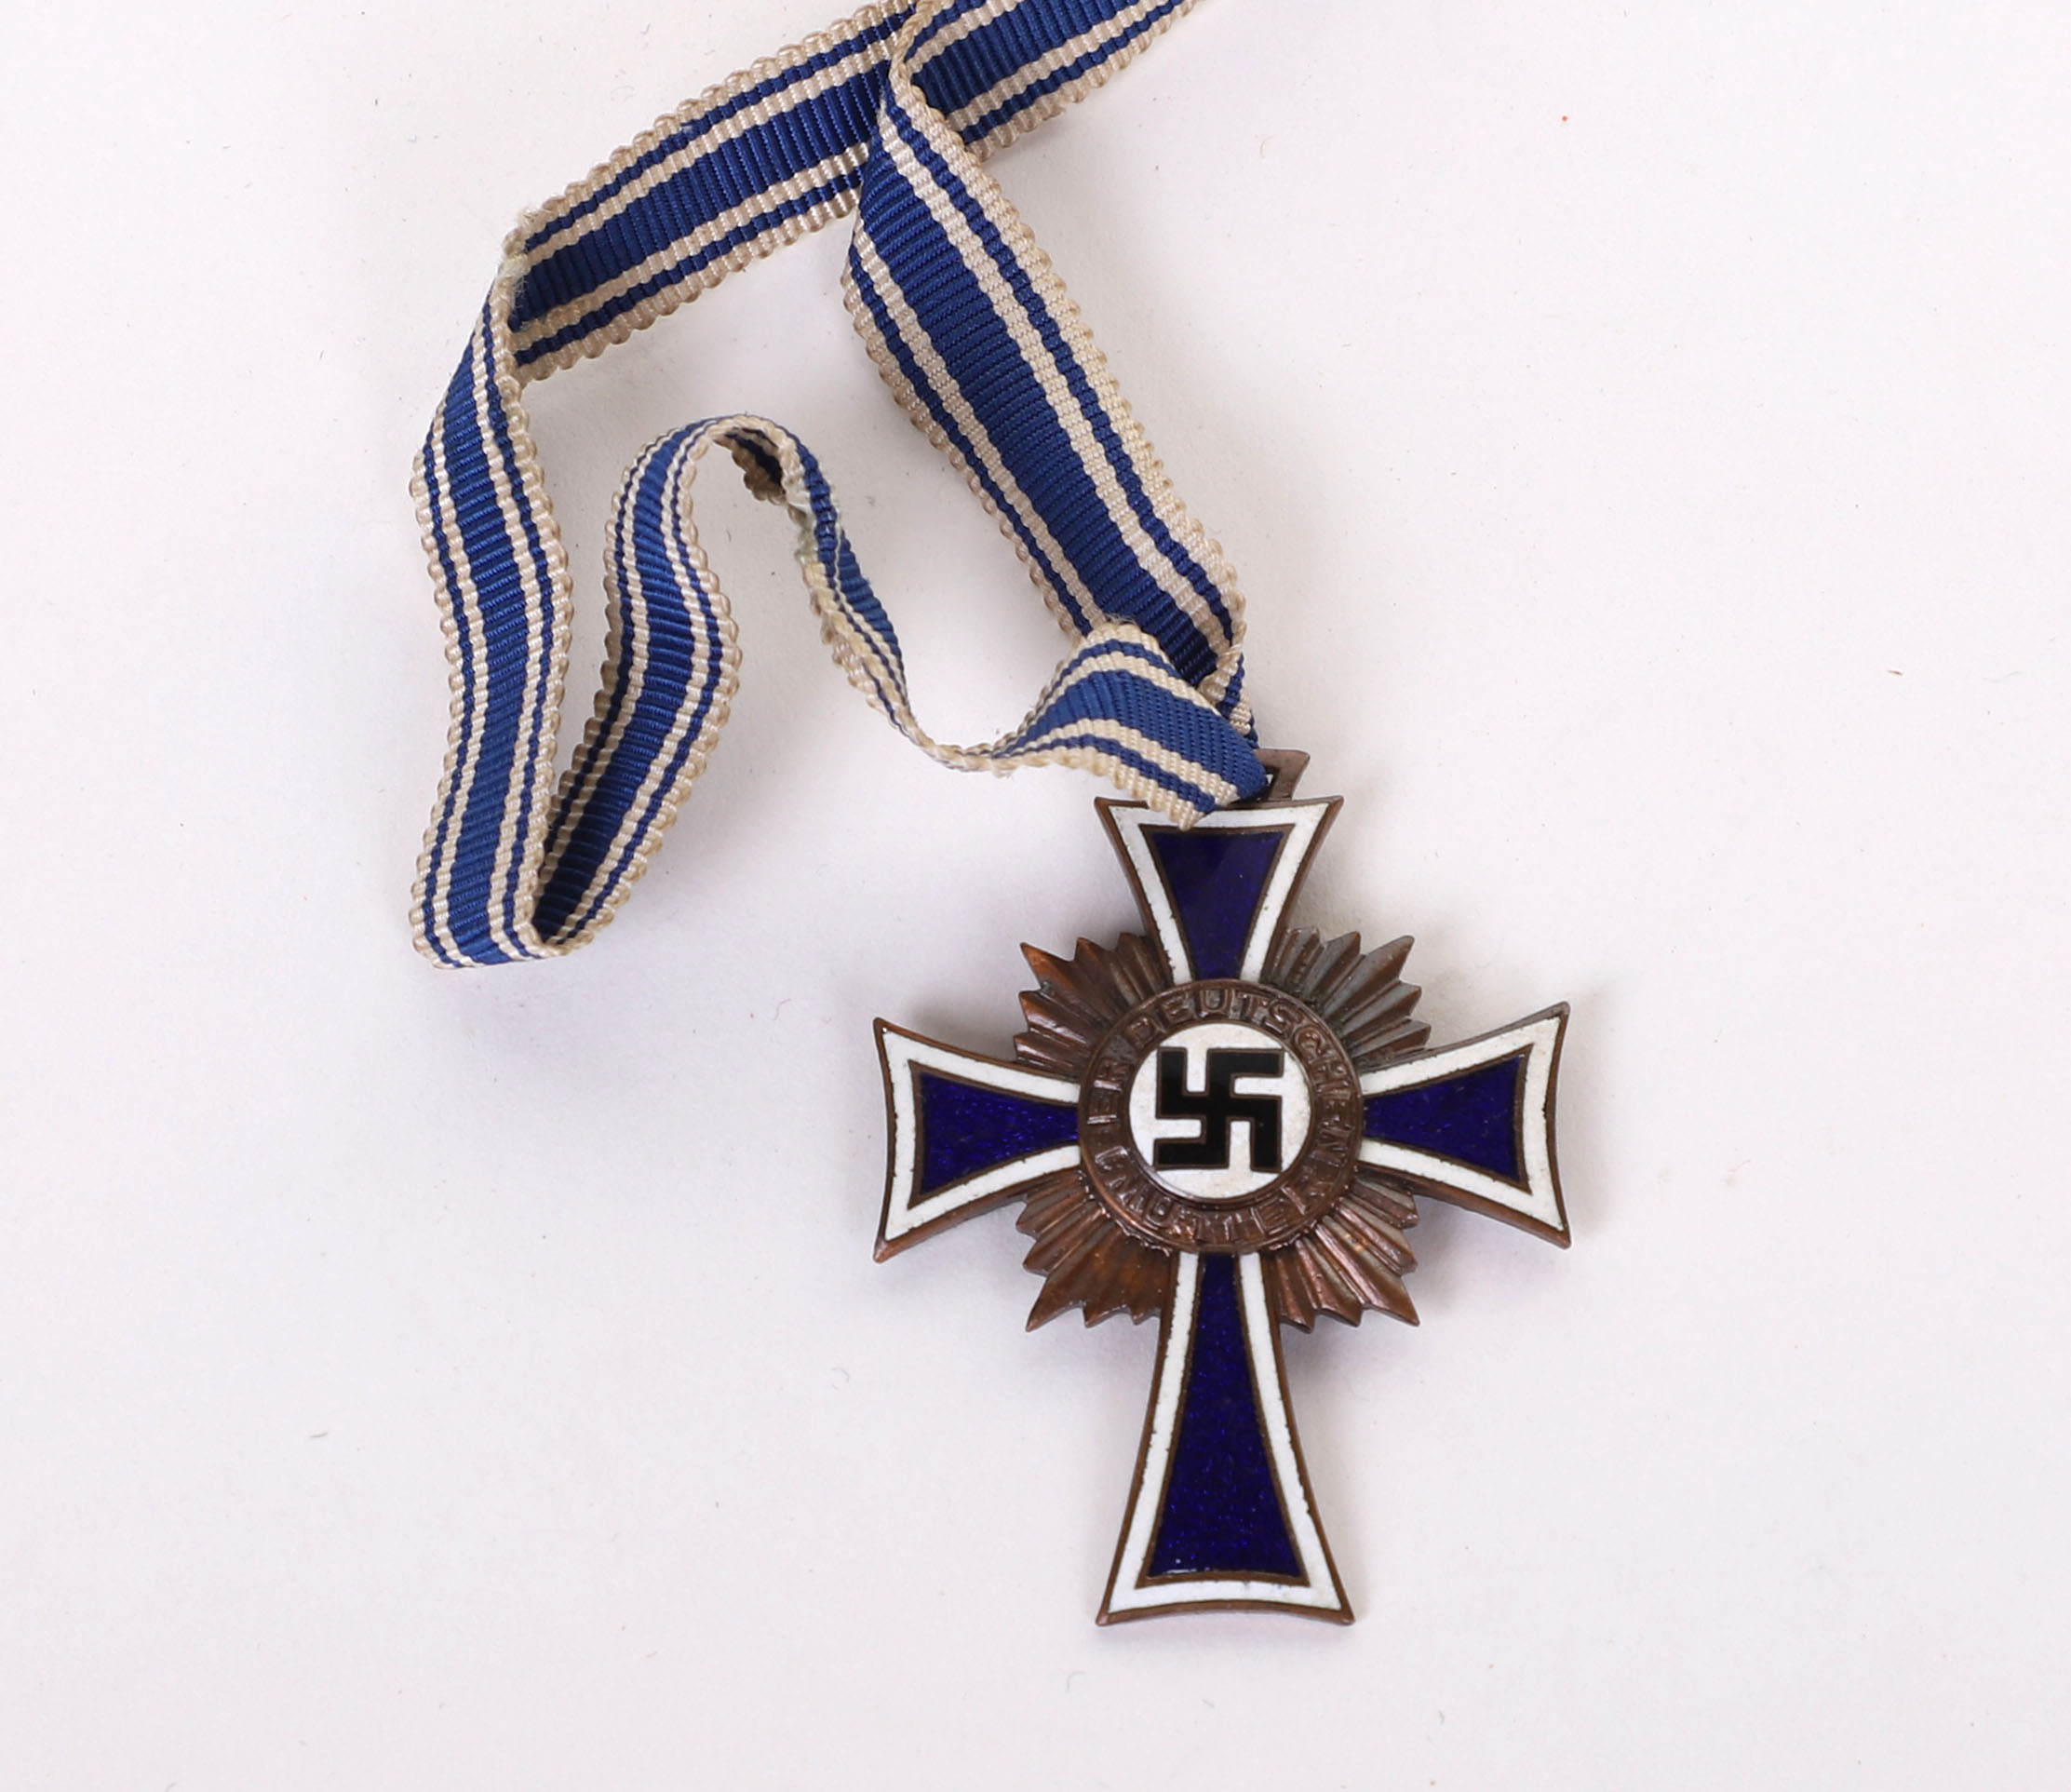 WW2 GERMAN INSIGNIA AND MEDAL GROUPING - Image 7 of 12